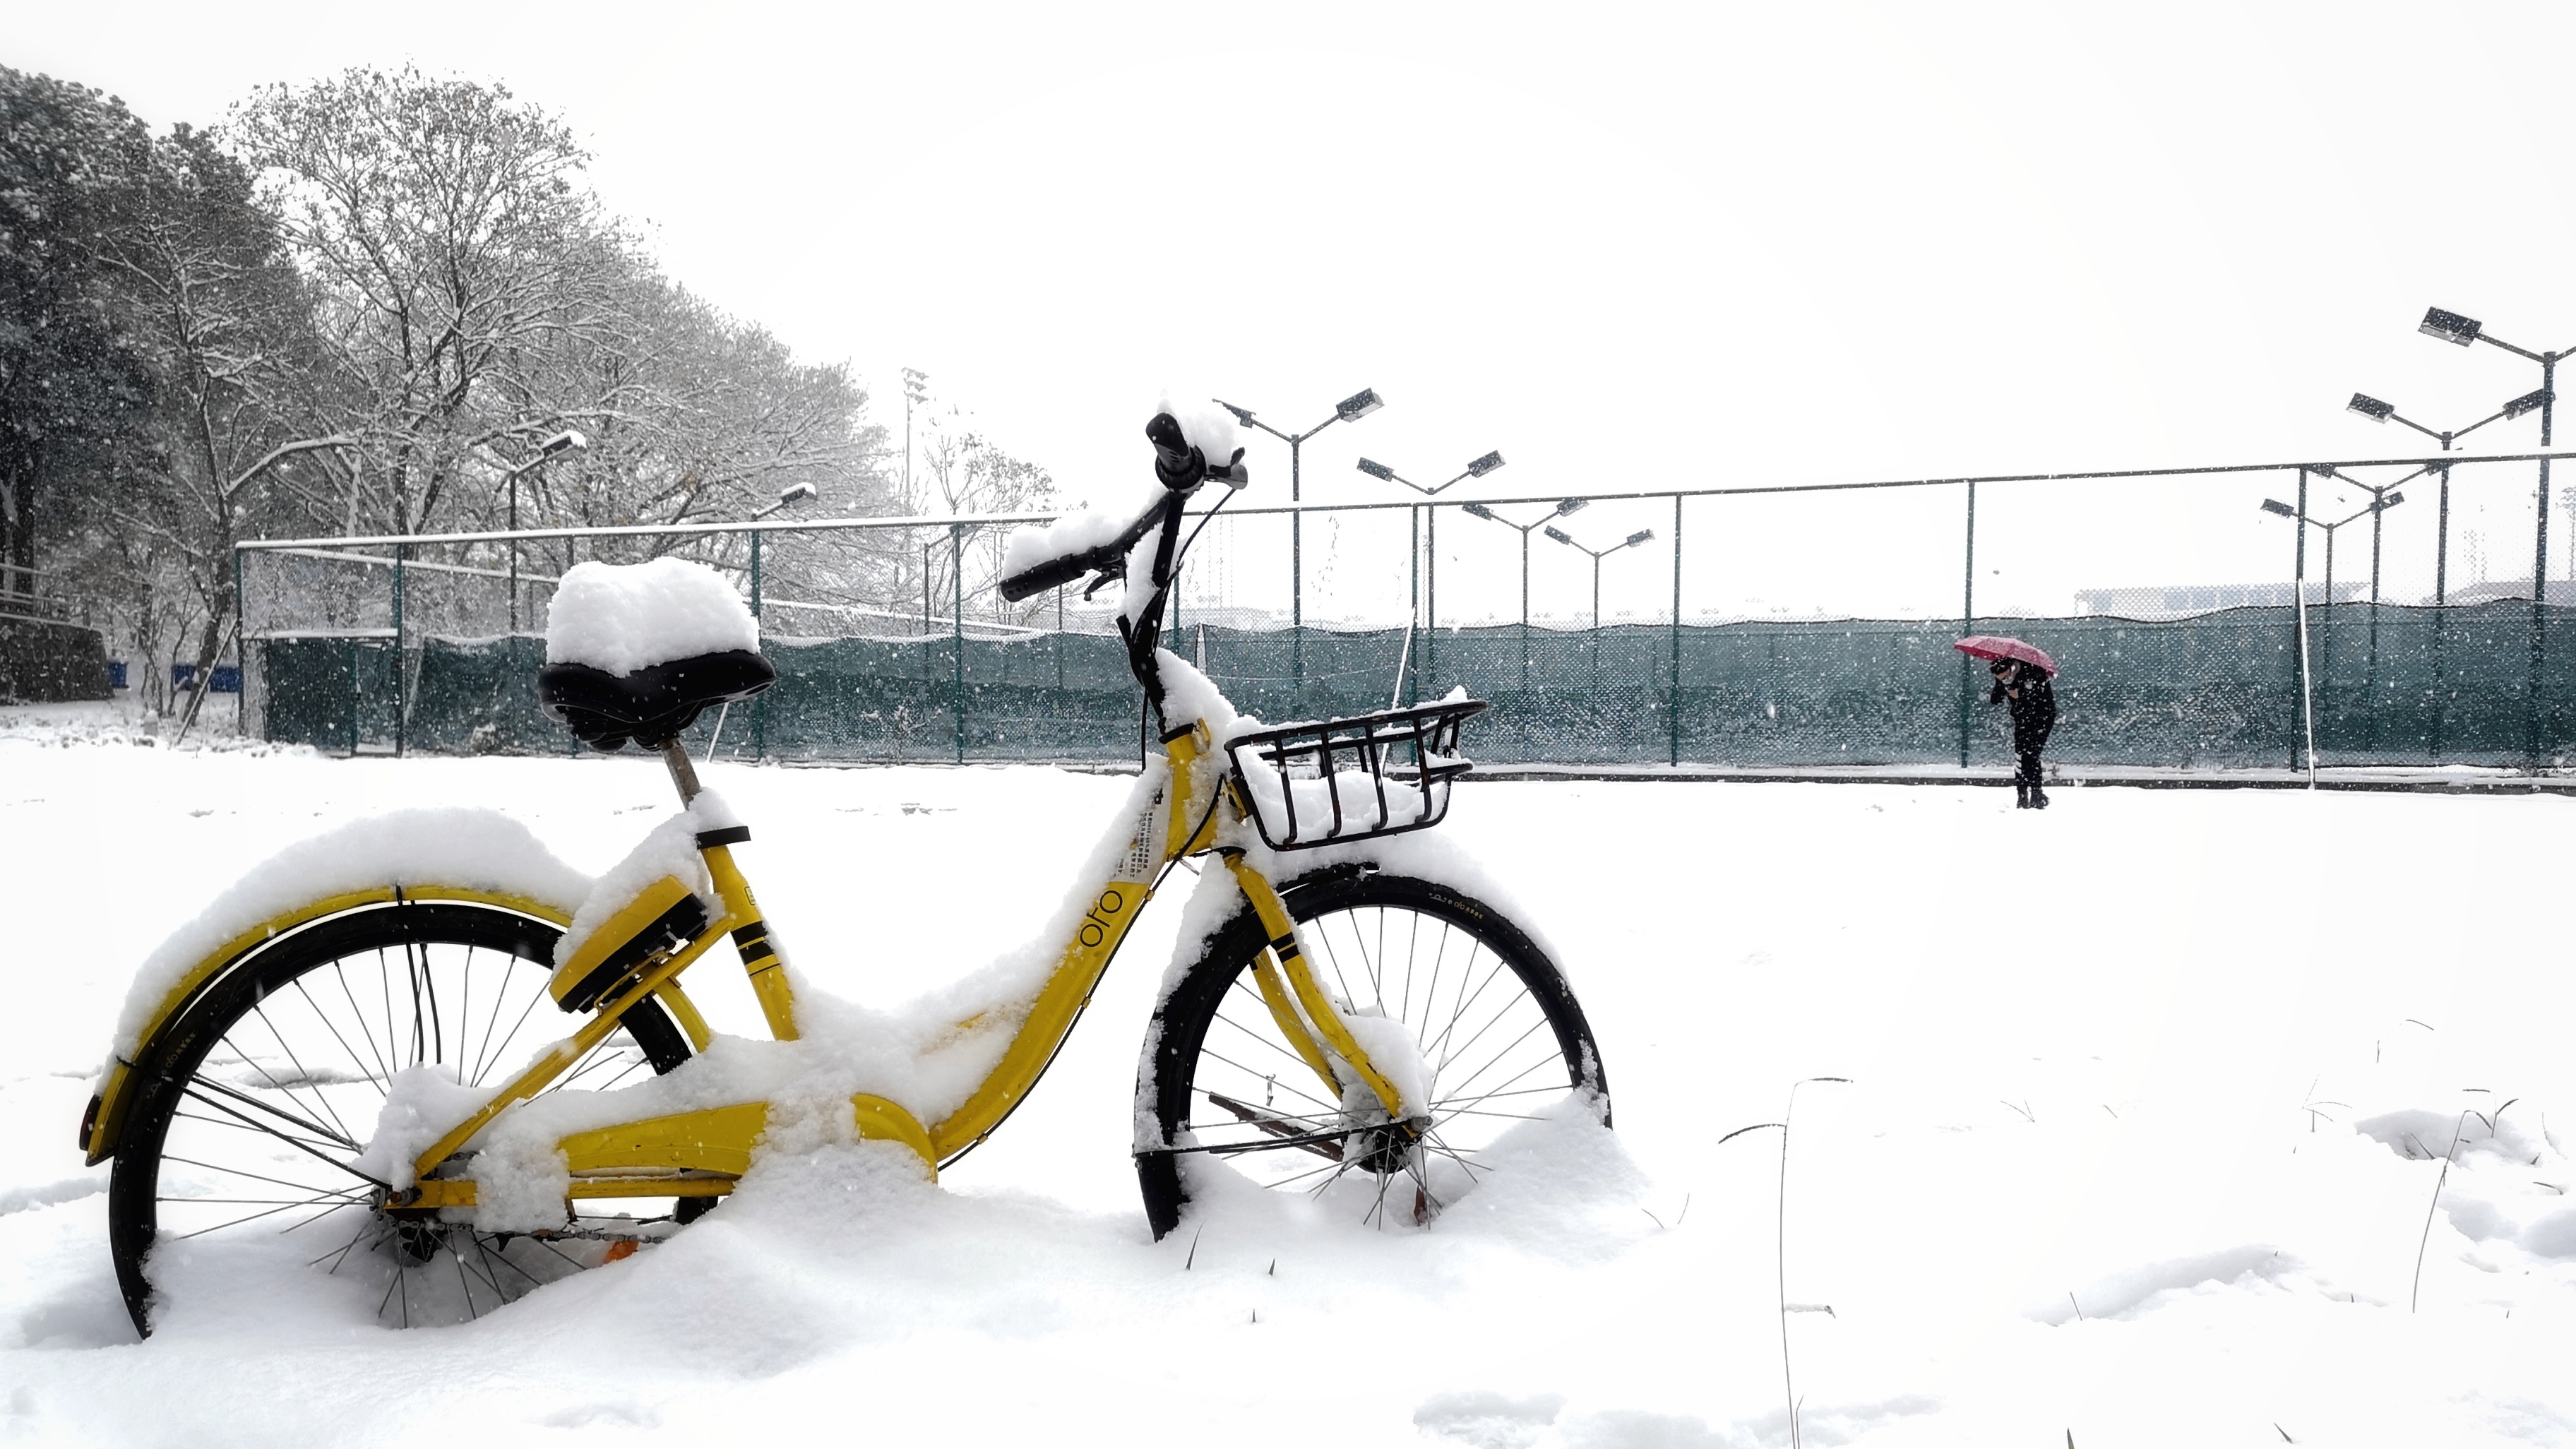 General 3648x2052 photography China wuhan hzau huazhong agricultural university university snow bicycle vehicle